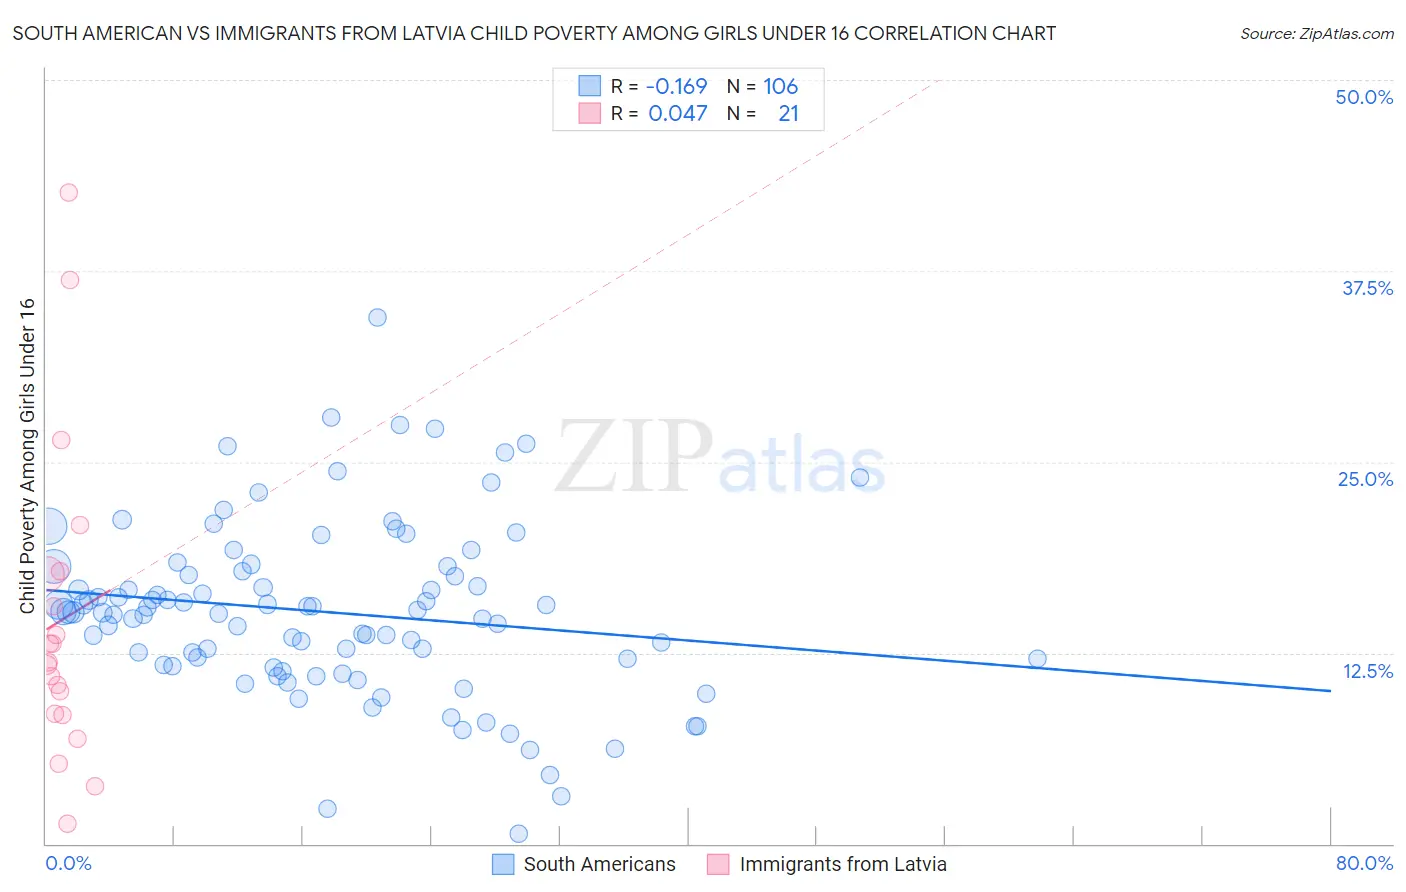 South American vs Immigrants from Latvia Child Poverty Among Girls Under 16